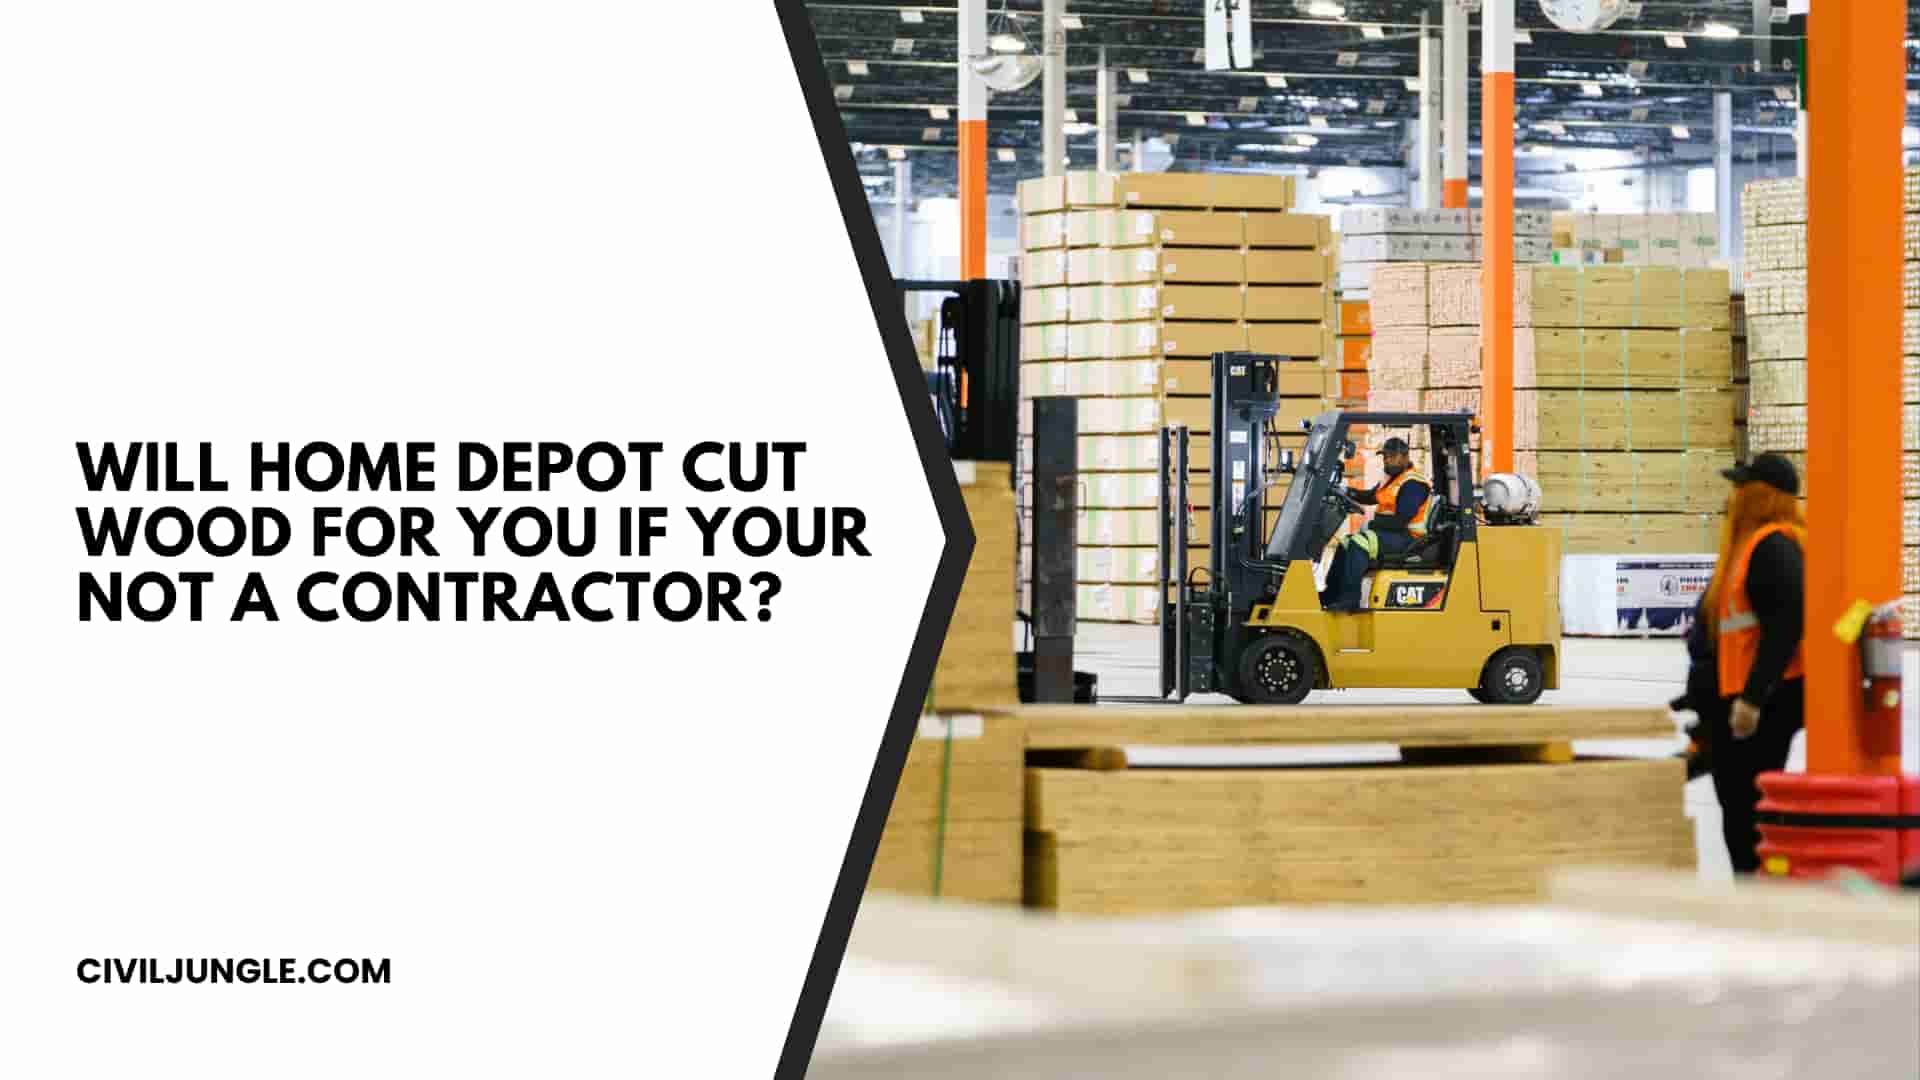 Will Home Depot Cut Wood For You If Your Not A Contractor?